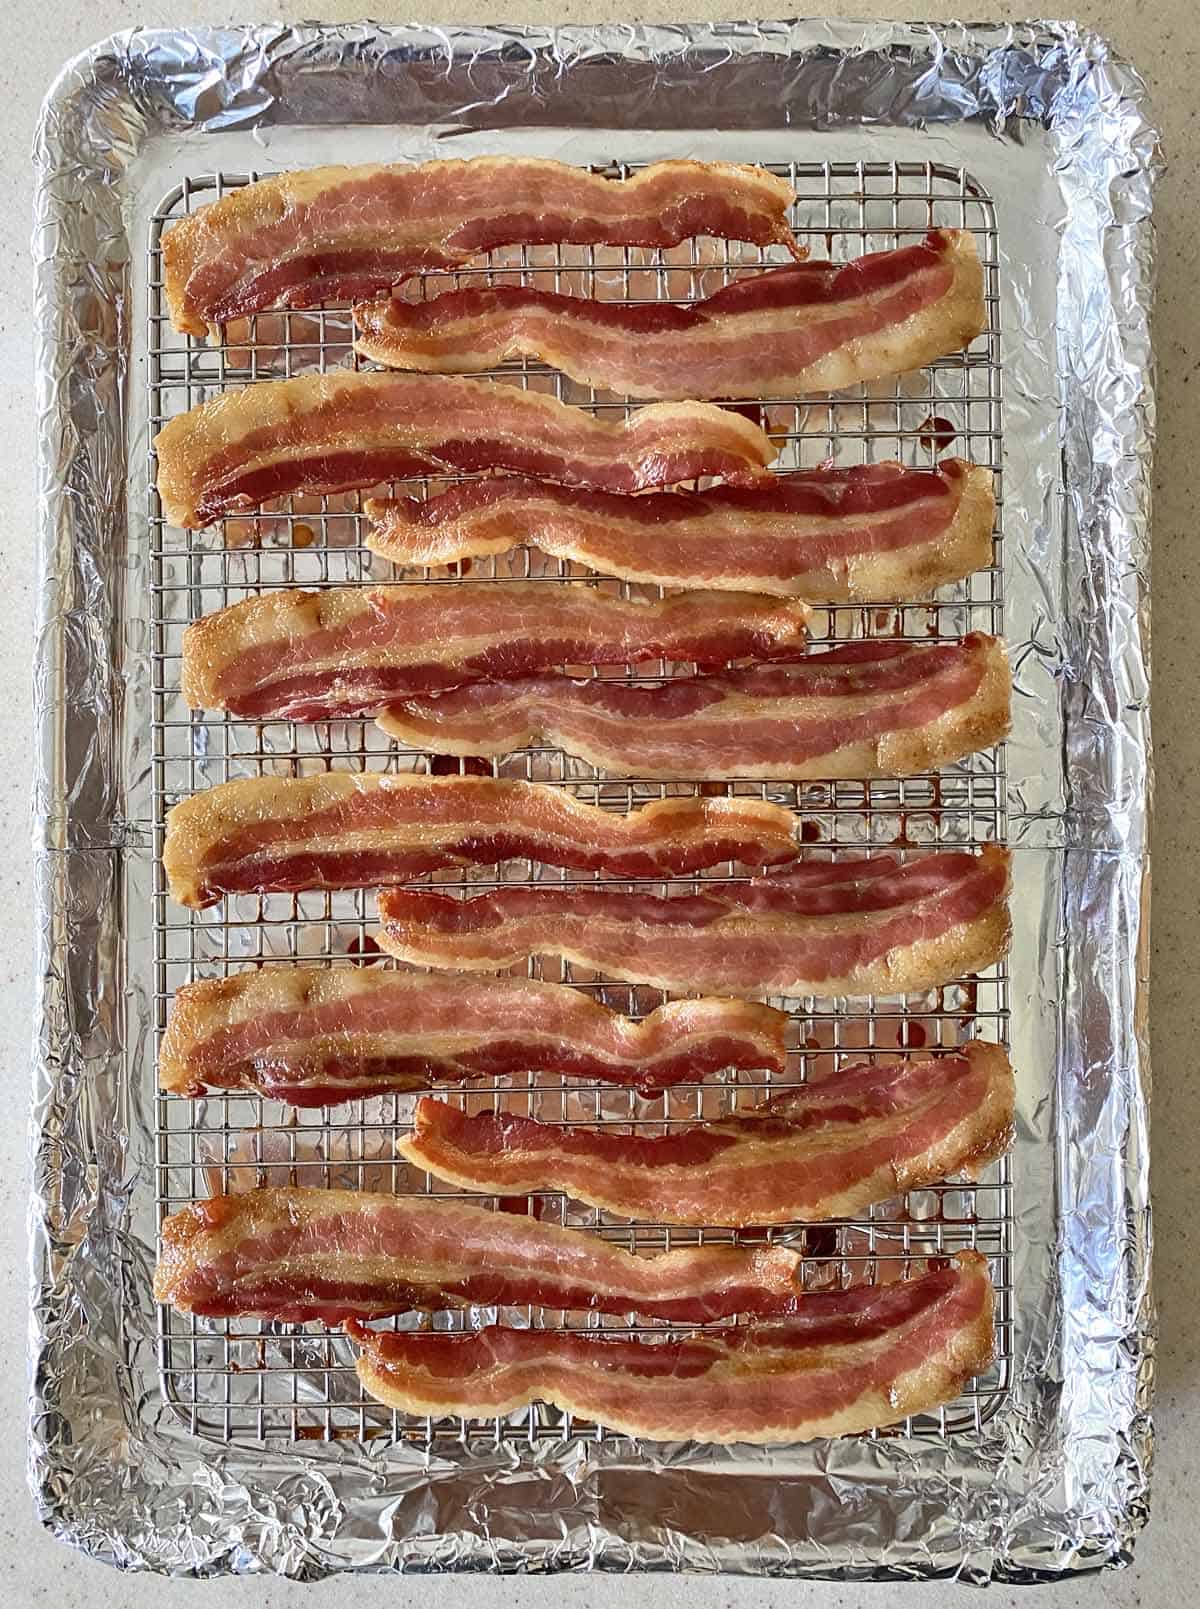 12 slices of half-cooked bacon jerky on a baking pan lined with foil and topped with a wire baking rack. 